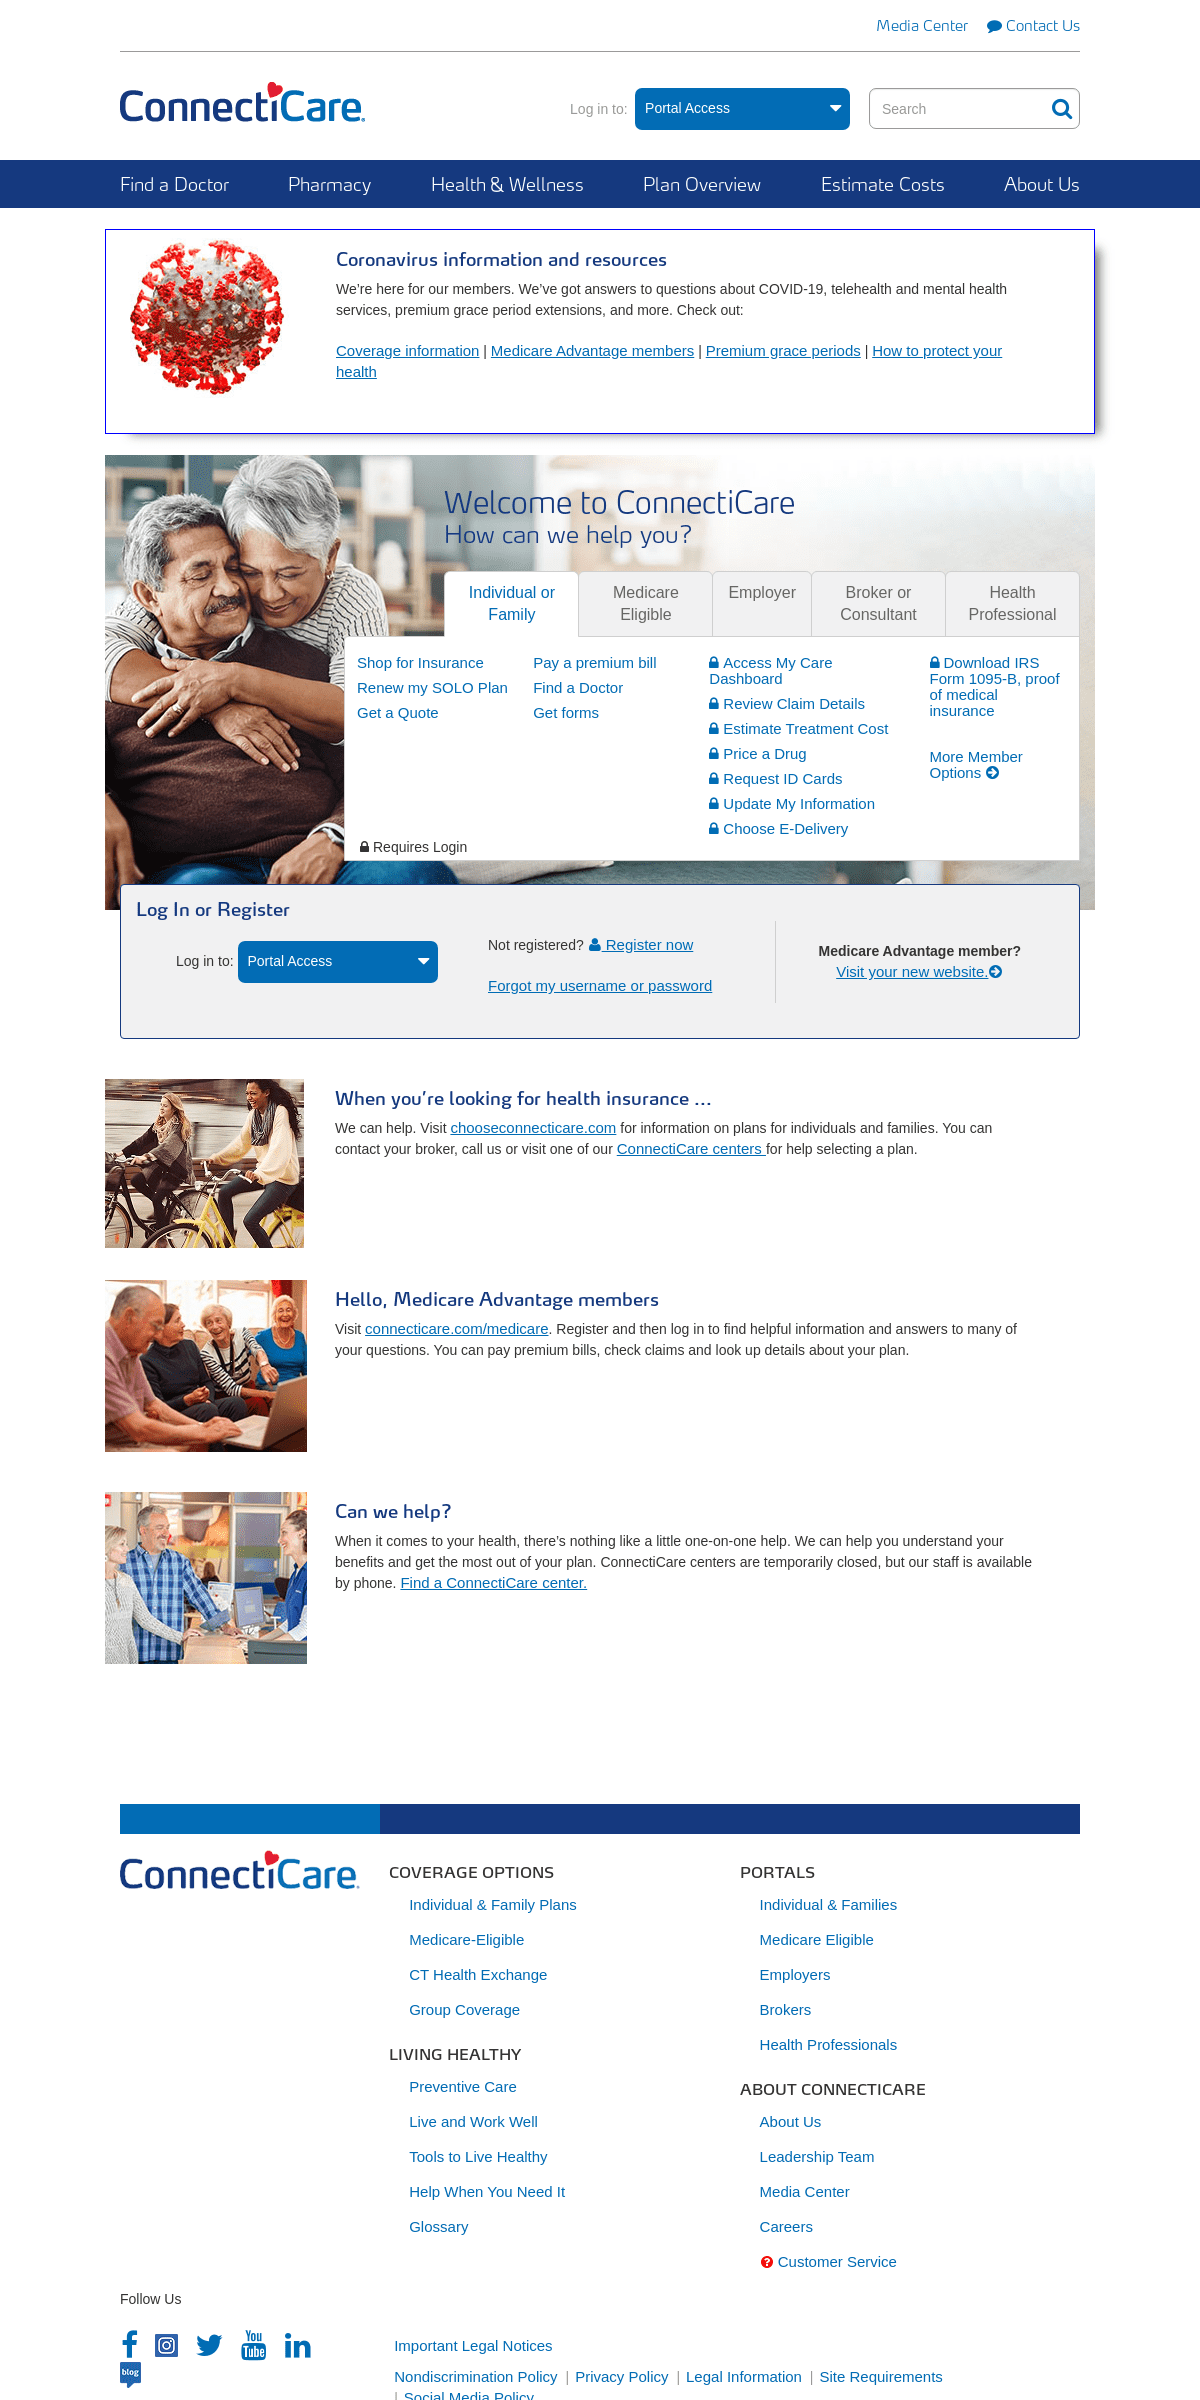 A complete backup of connecticare.com